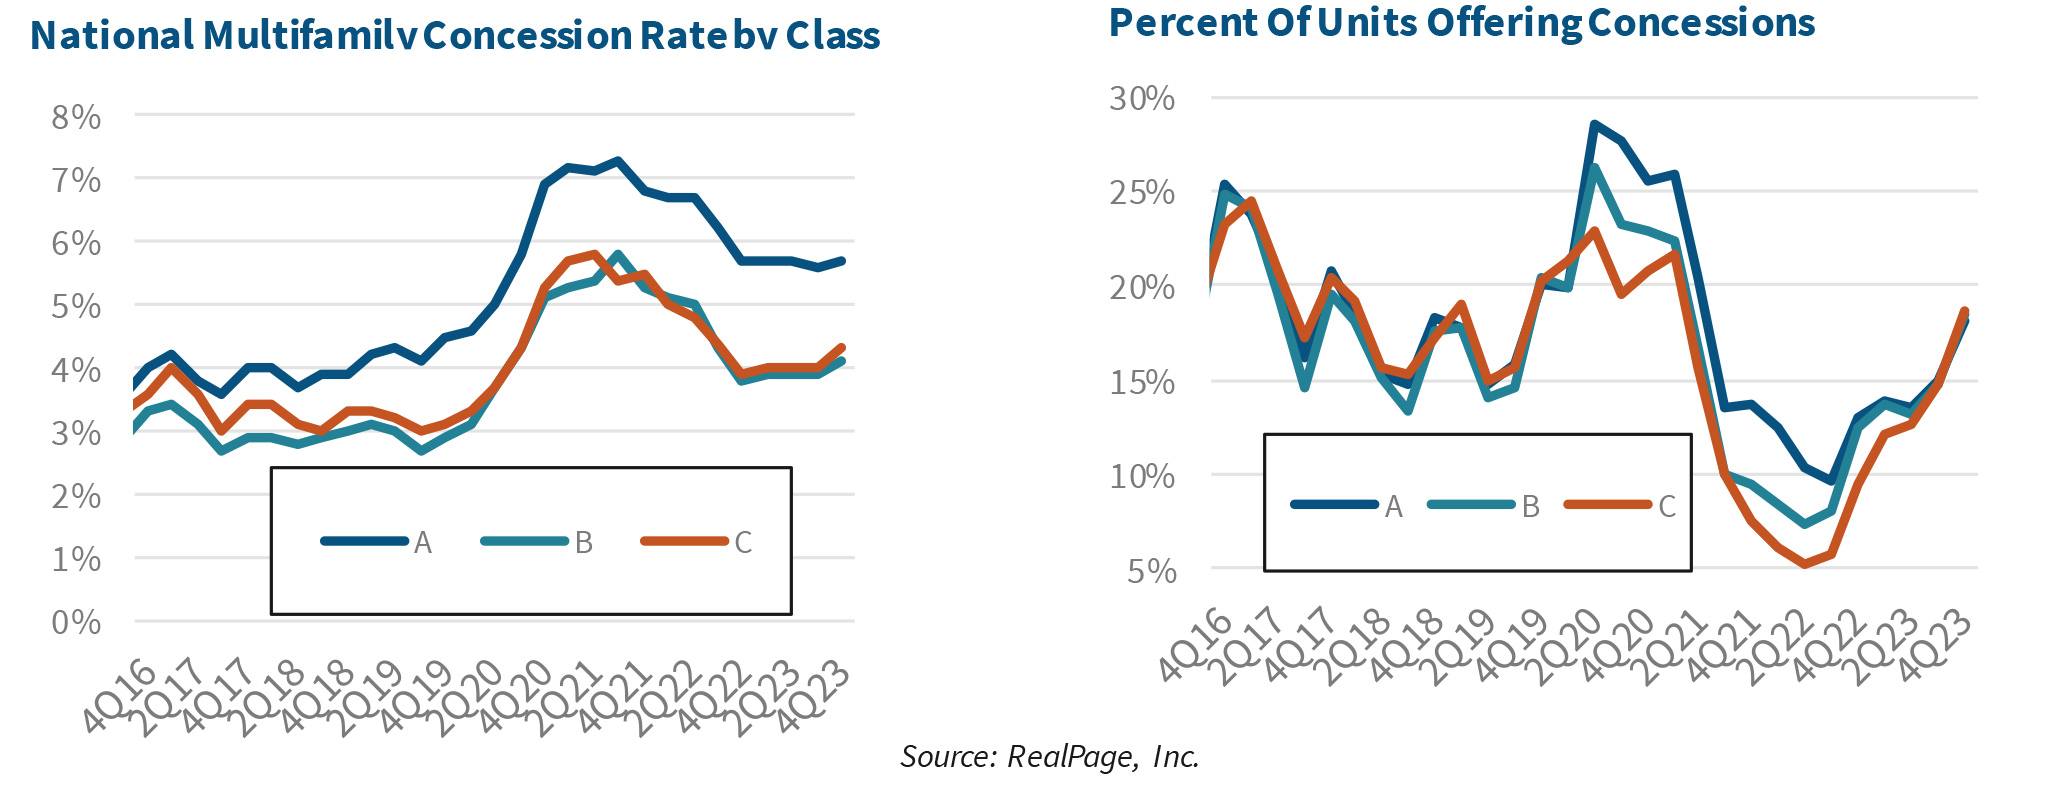 National Multifamily Concession Rate by Class | Percent Of Units Offering Concessions